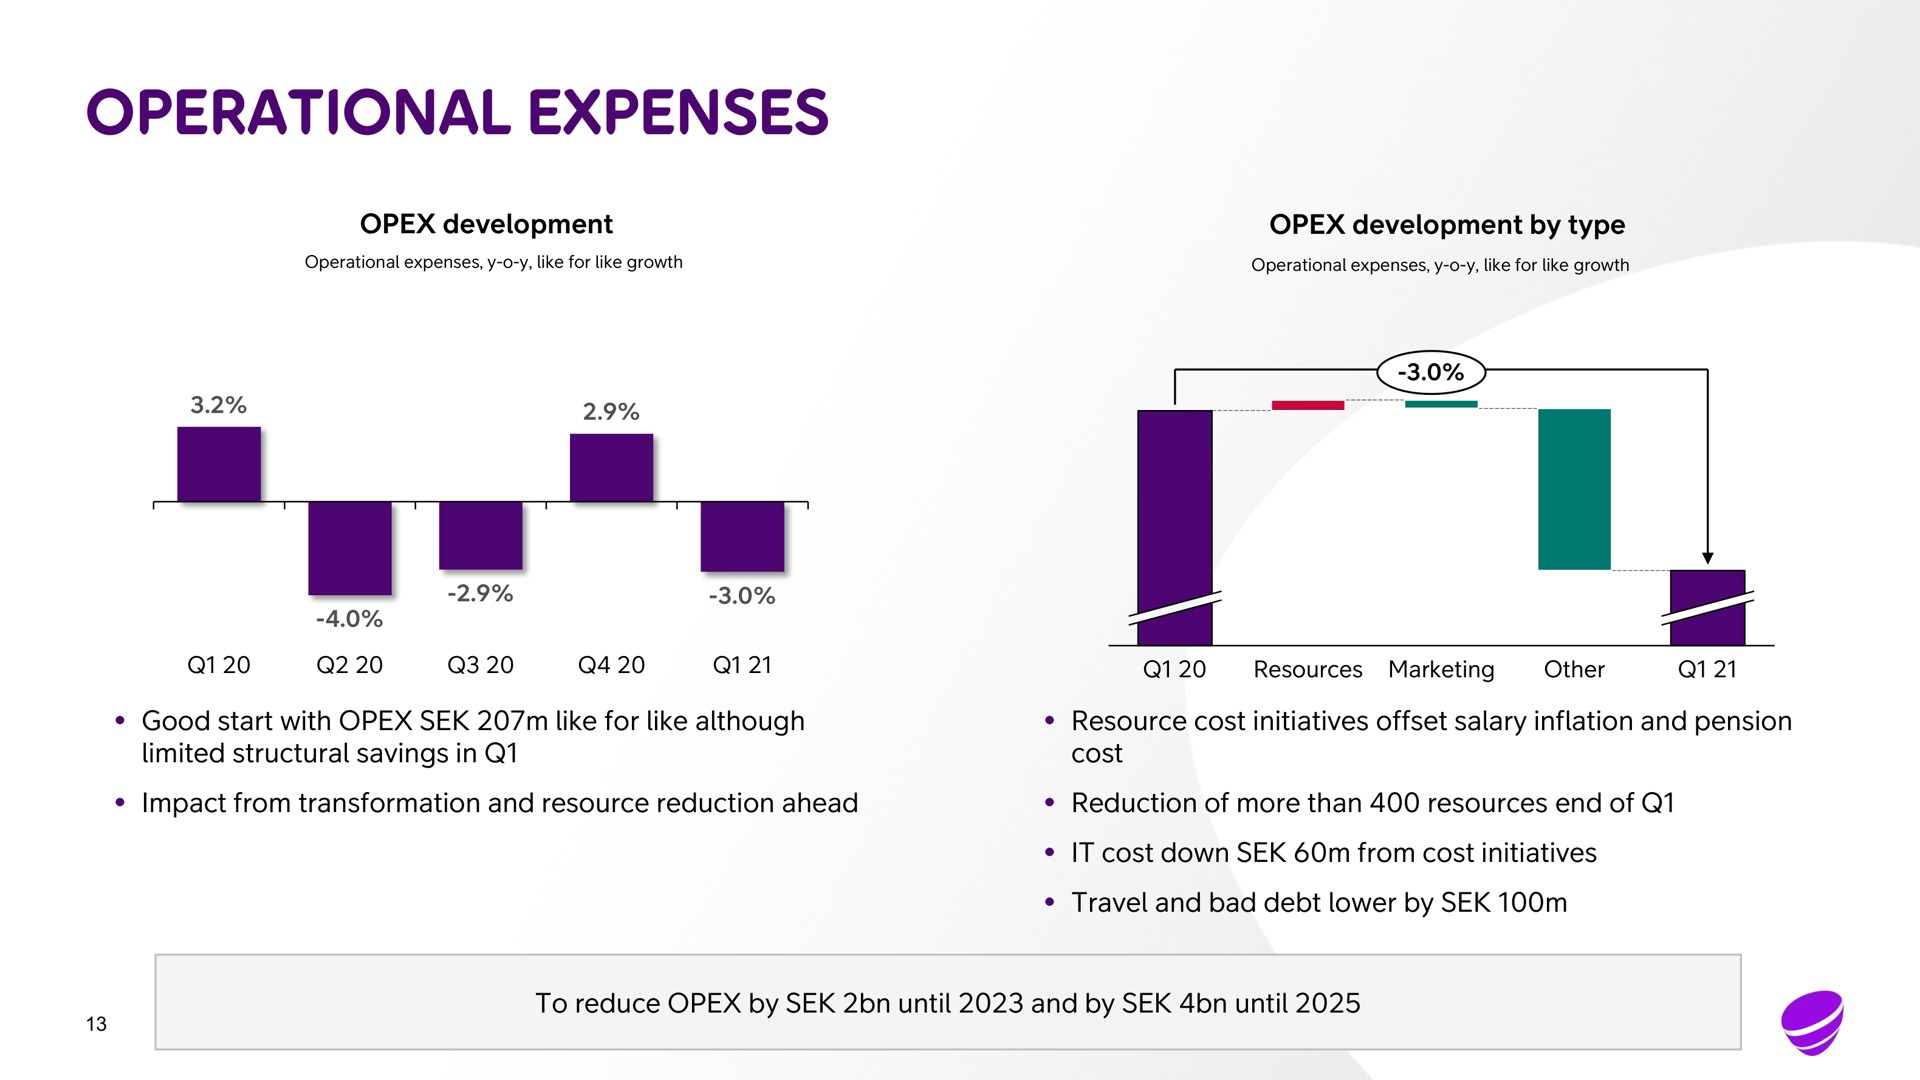 operational expenses development development by type good start with like for like although resource cost initiatives offset salary inflation and pension limited structural savings in cost impact from transformation and resource reduction ahead reduction of more than resources end of it cost down from cost initiatives travel and bad debt lower by to reduce by until and by until | Telia Company